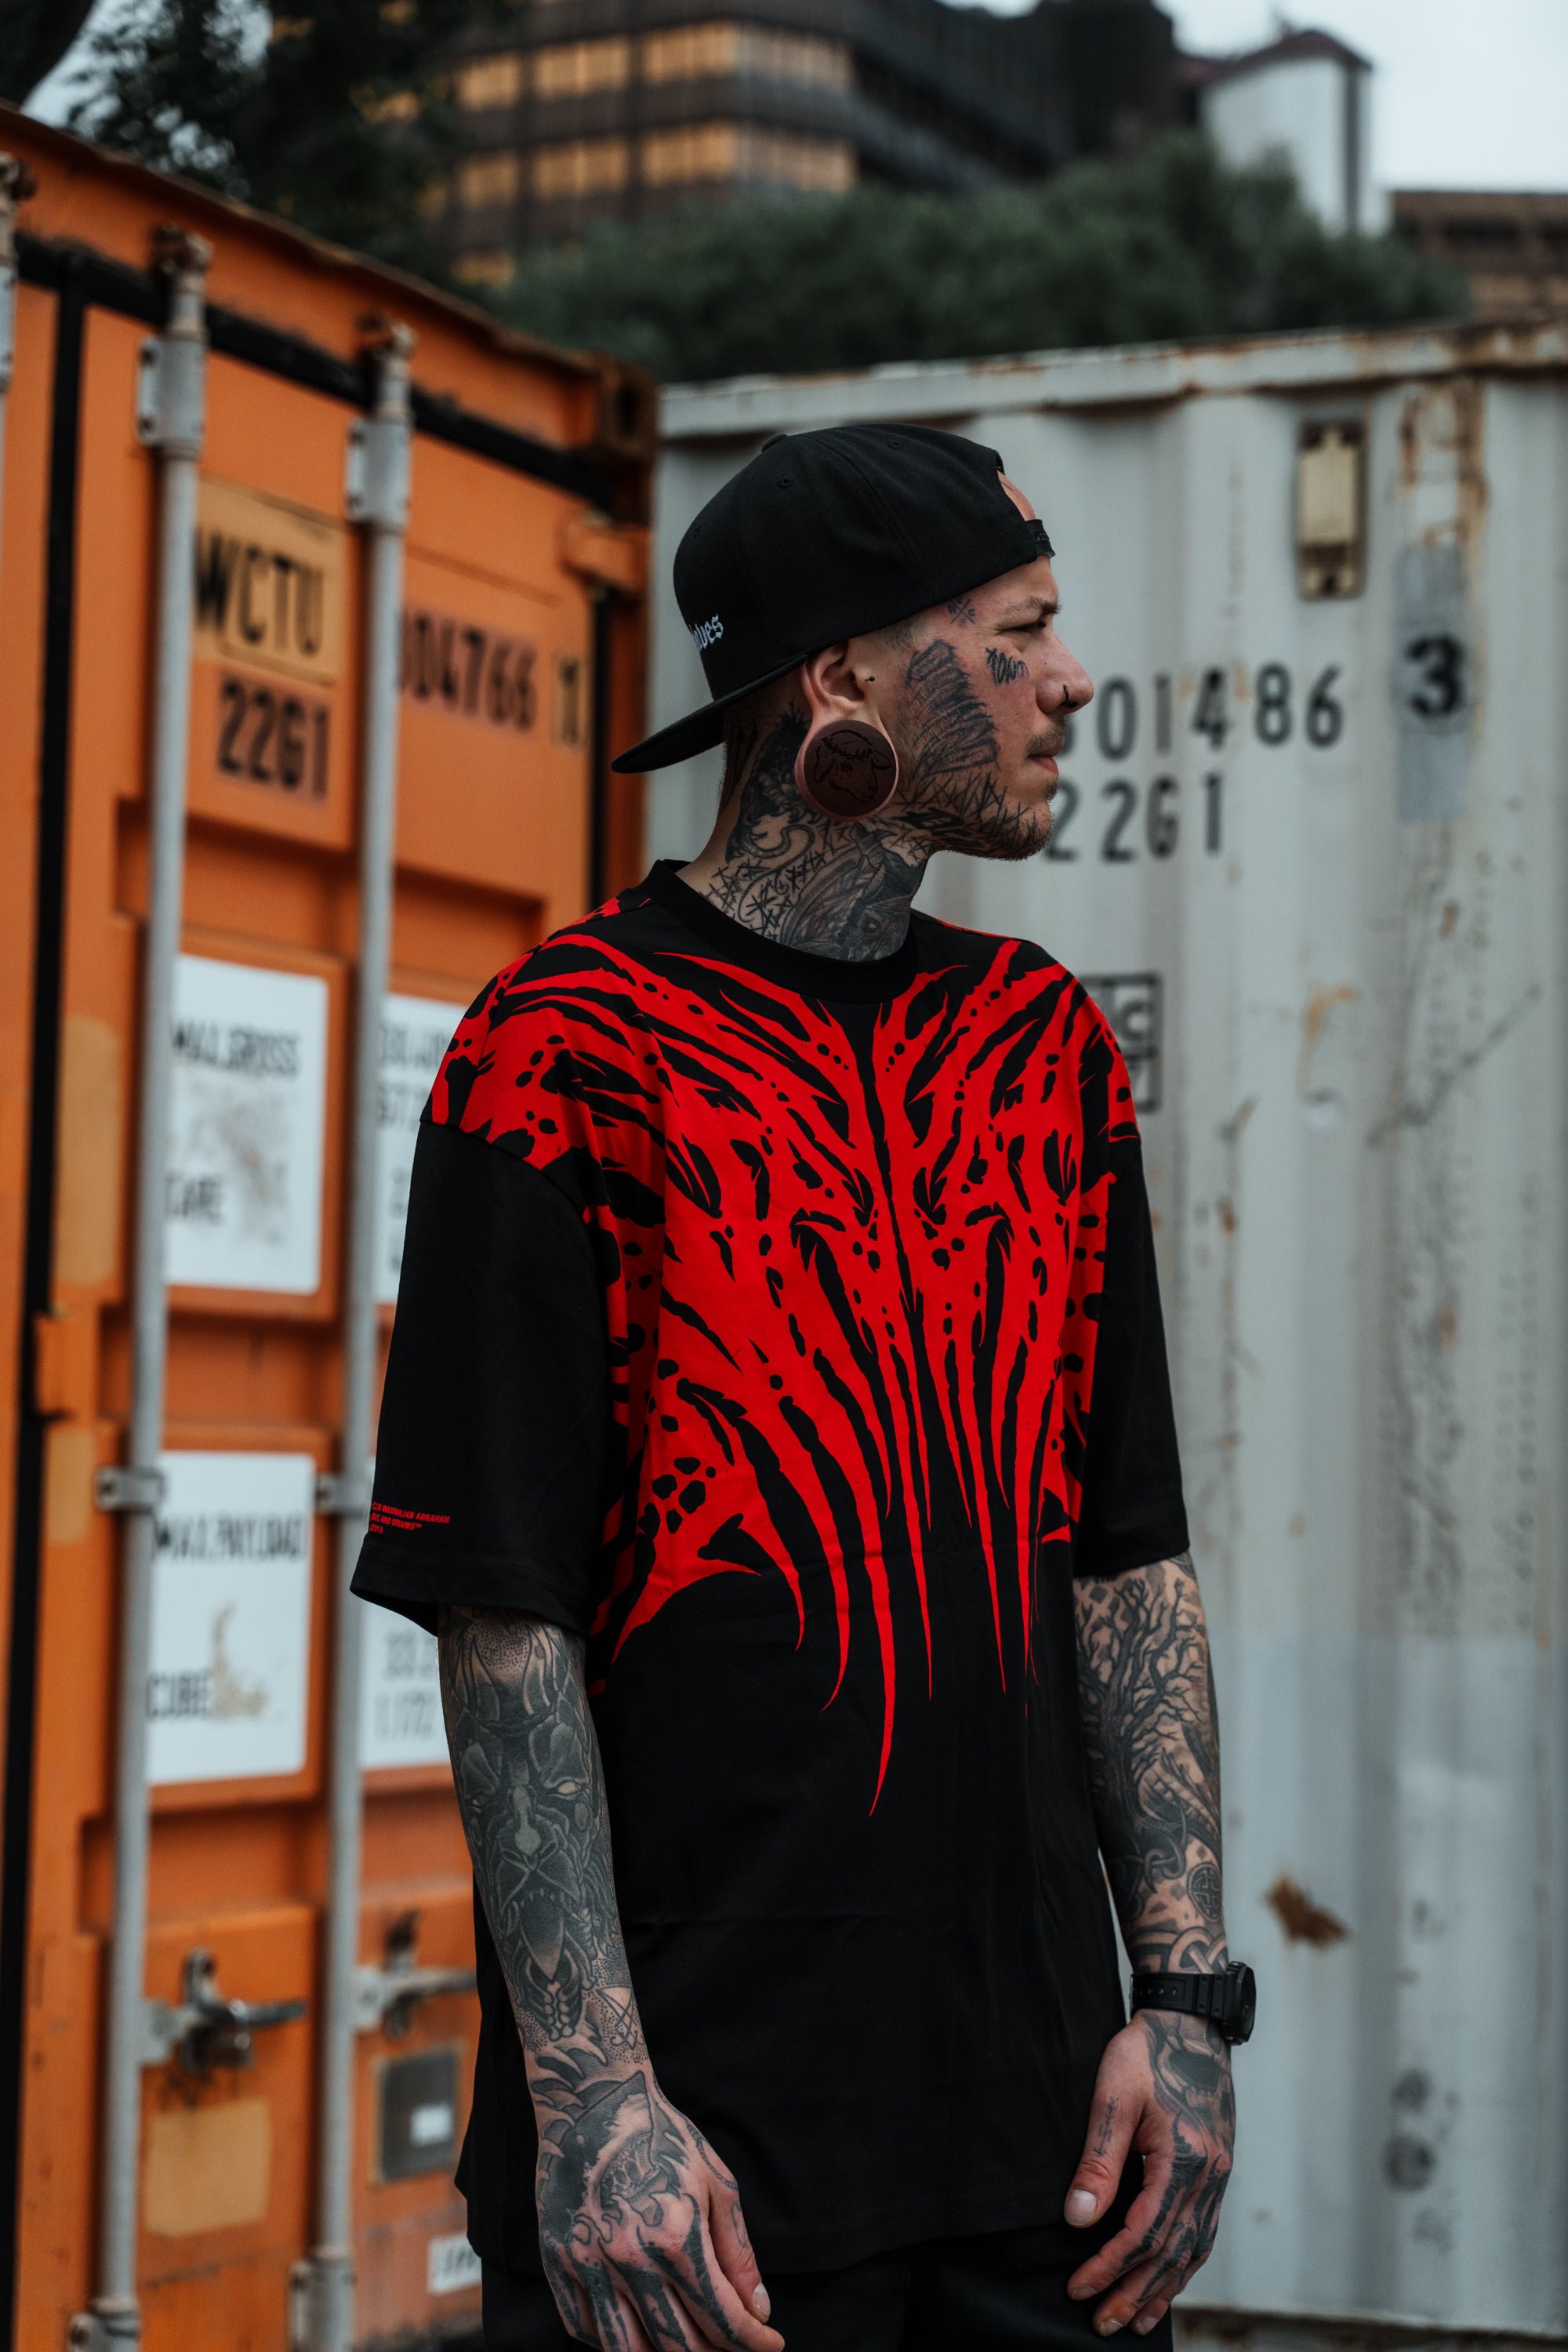 Necroblade (red) - Heavy Oversized T-Shirt black 250GSM